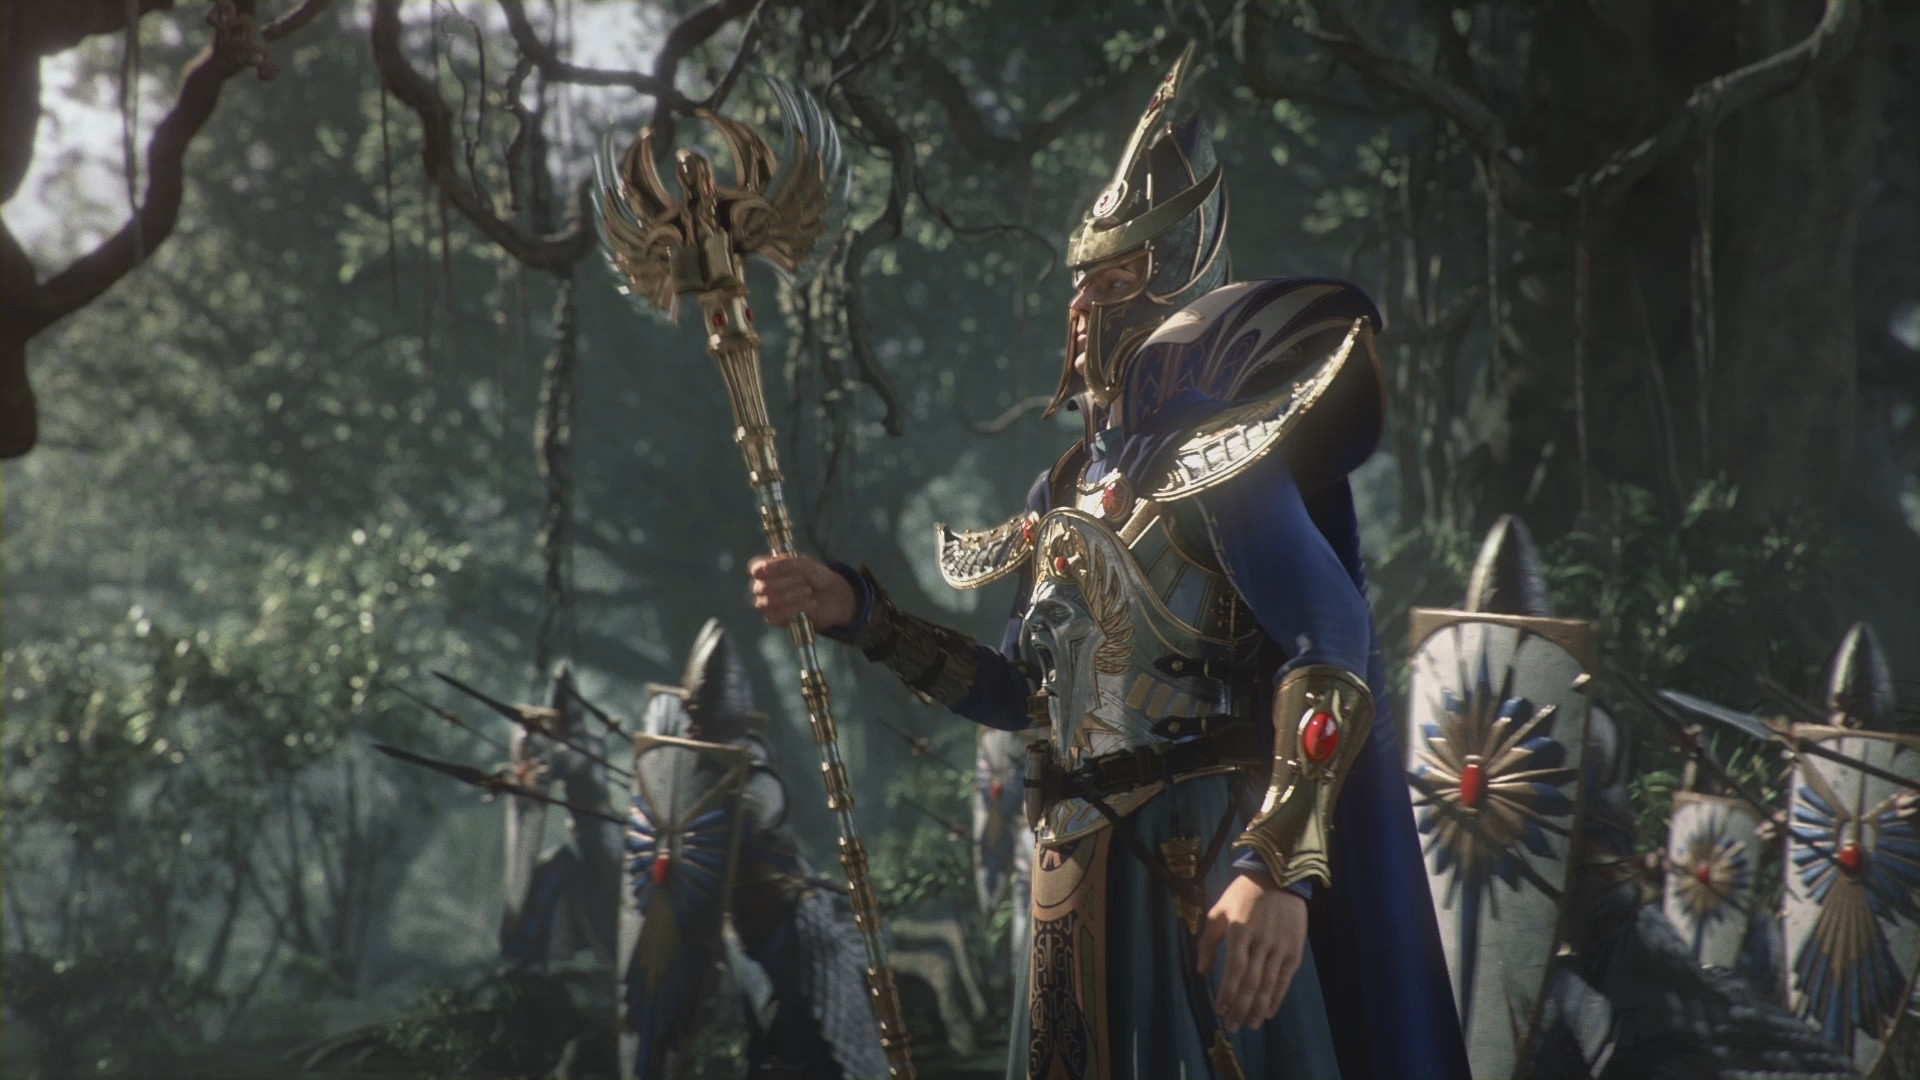 1920x1080 Total War: Warhammer 2 takes an in-depth look at its High Elves in battle |  PC Gamer